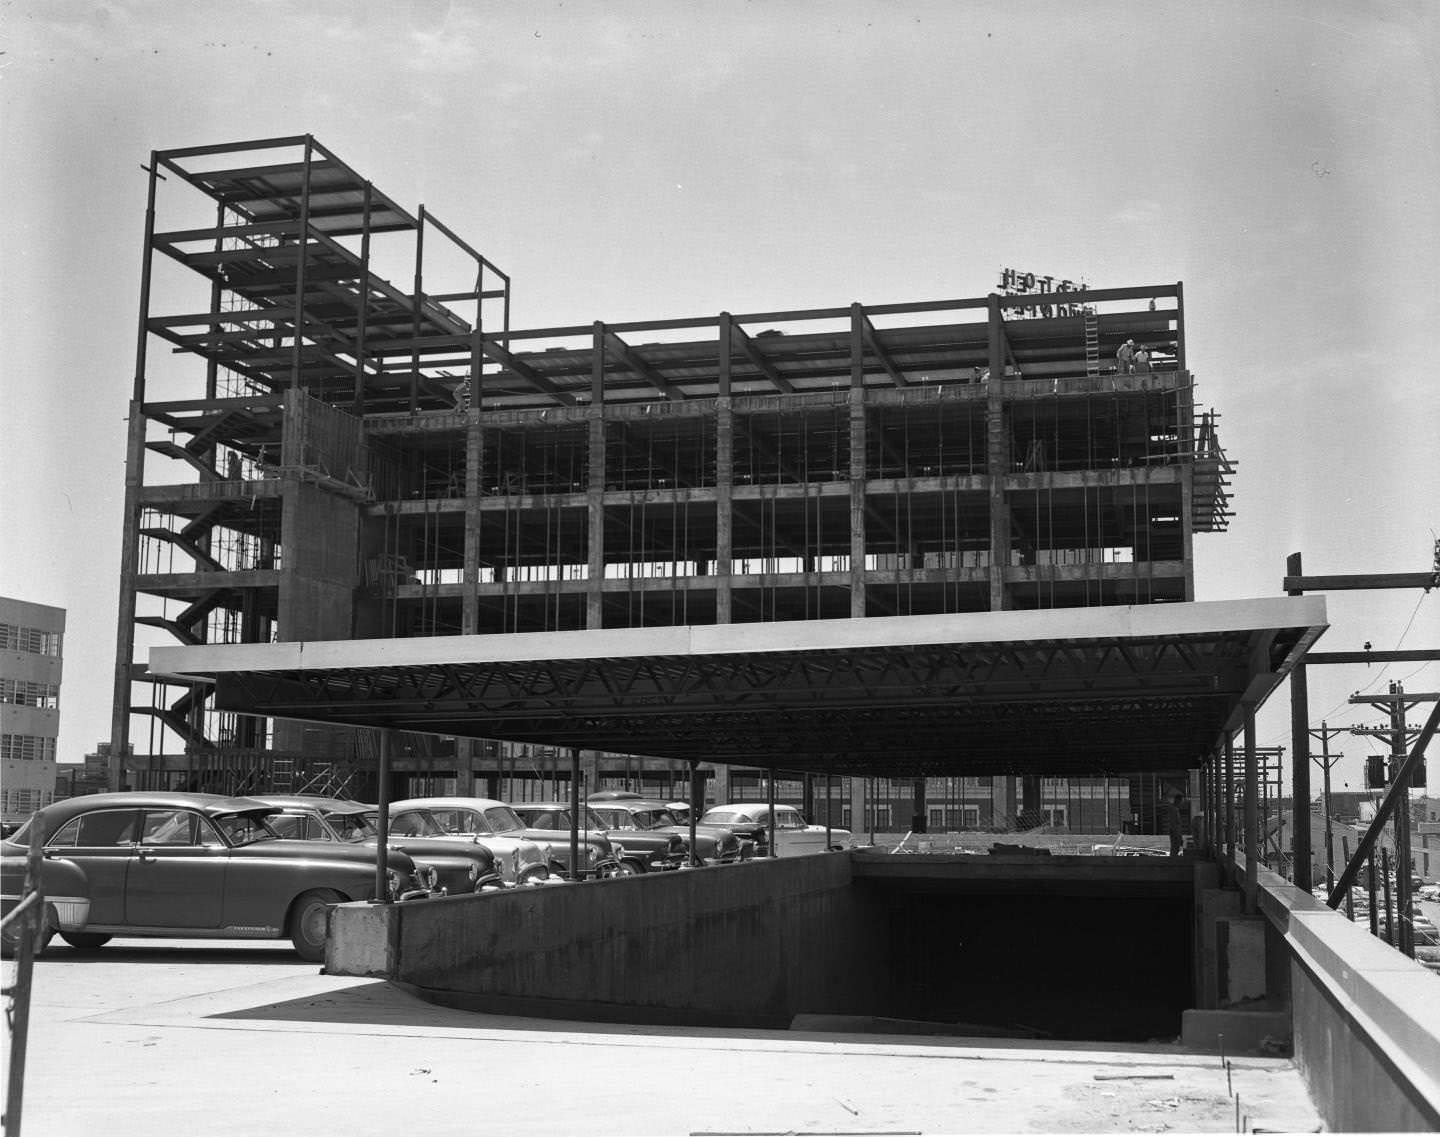 The Citizens National Bank under construction, 1954. The multi-story building's frame is partially completed. There are men working and cars parked at the site.